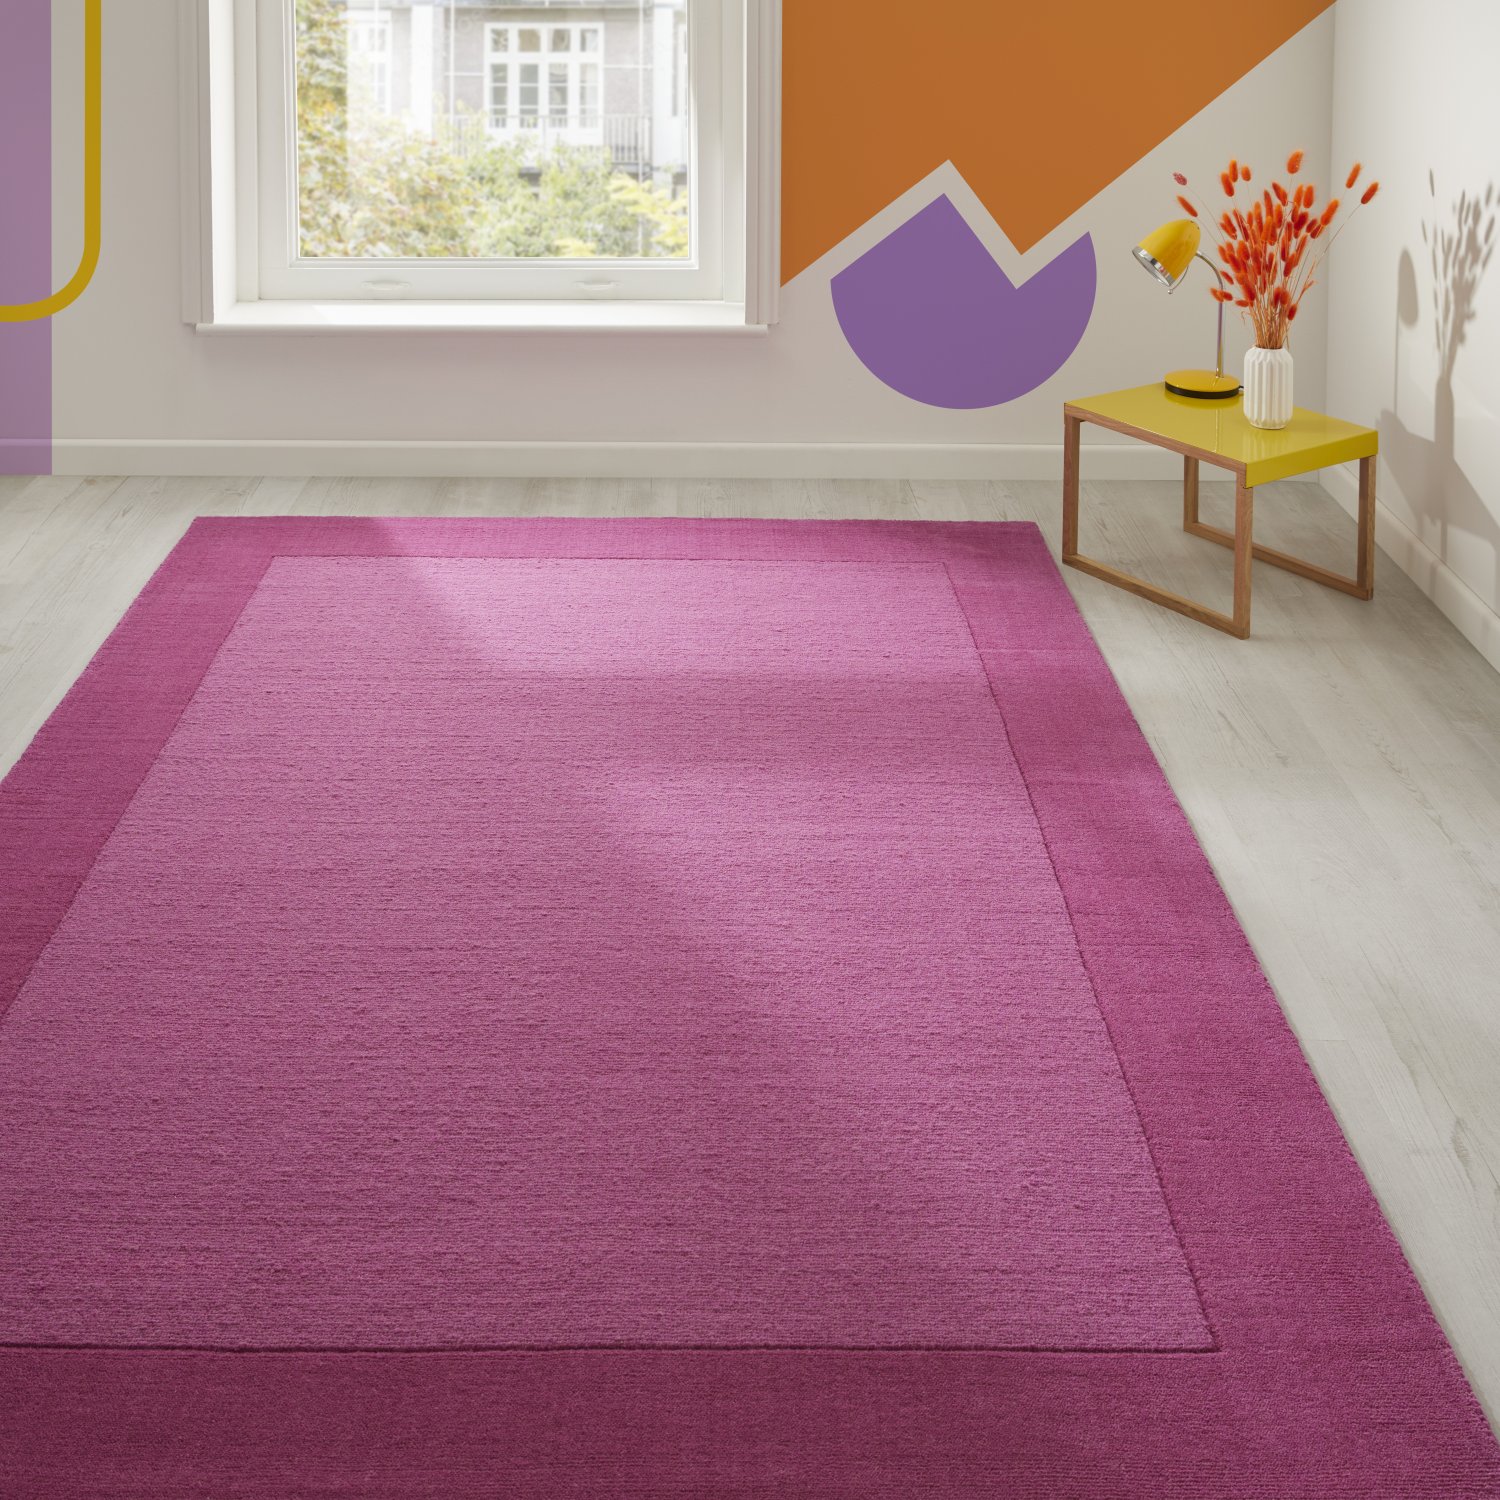 Colours Bordered Wool Rug - Pink